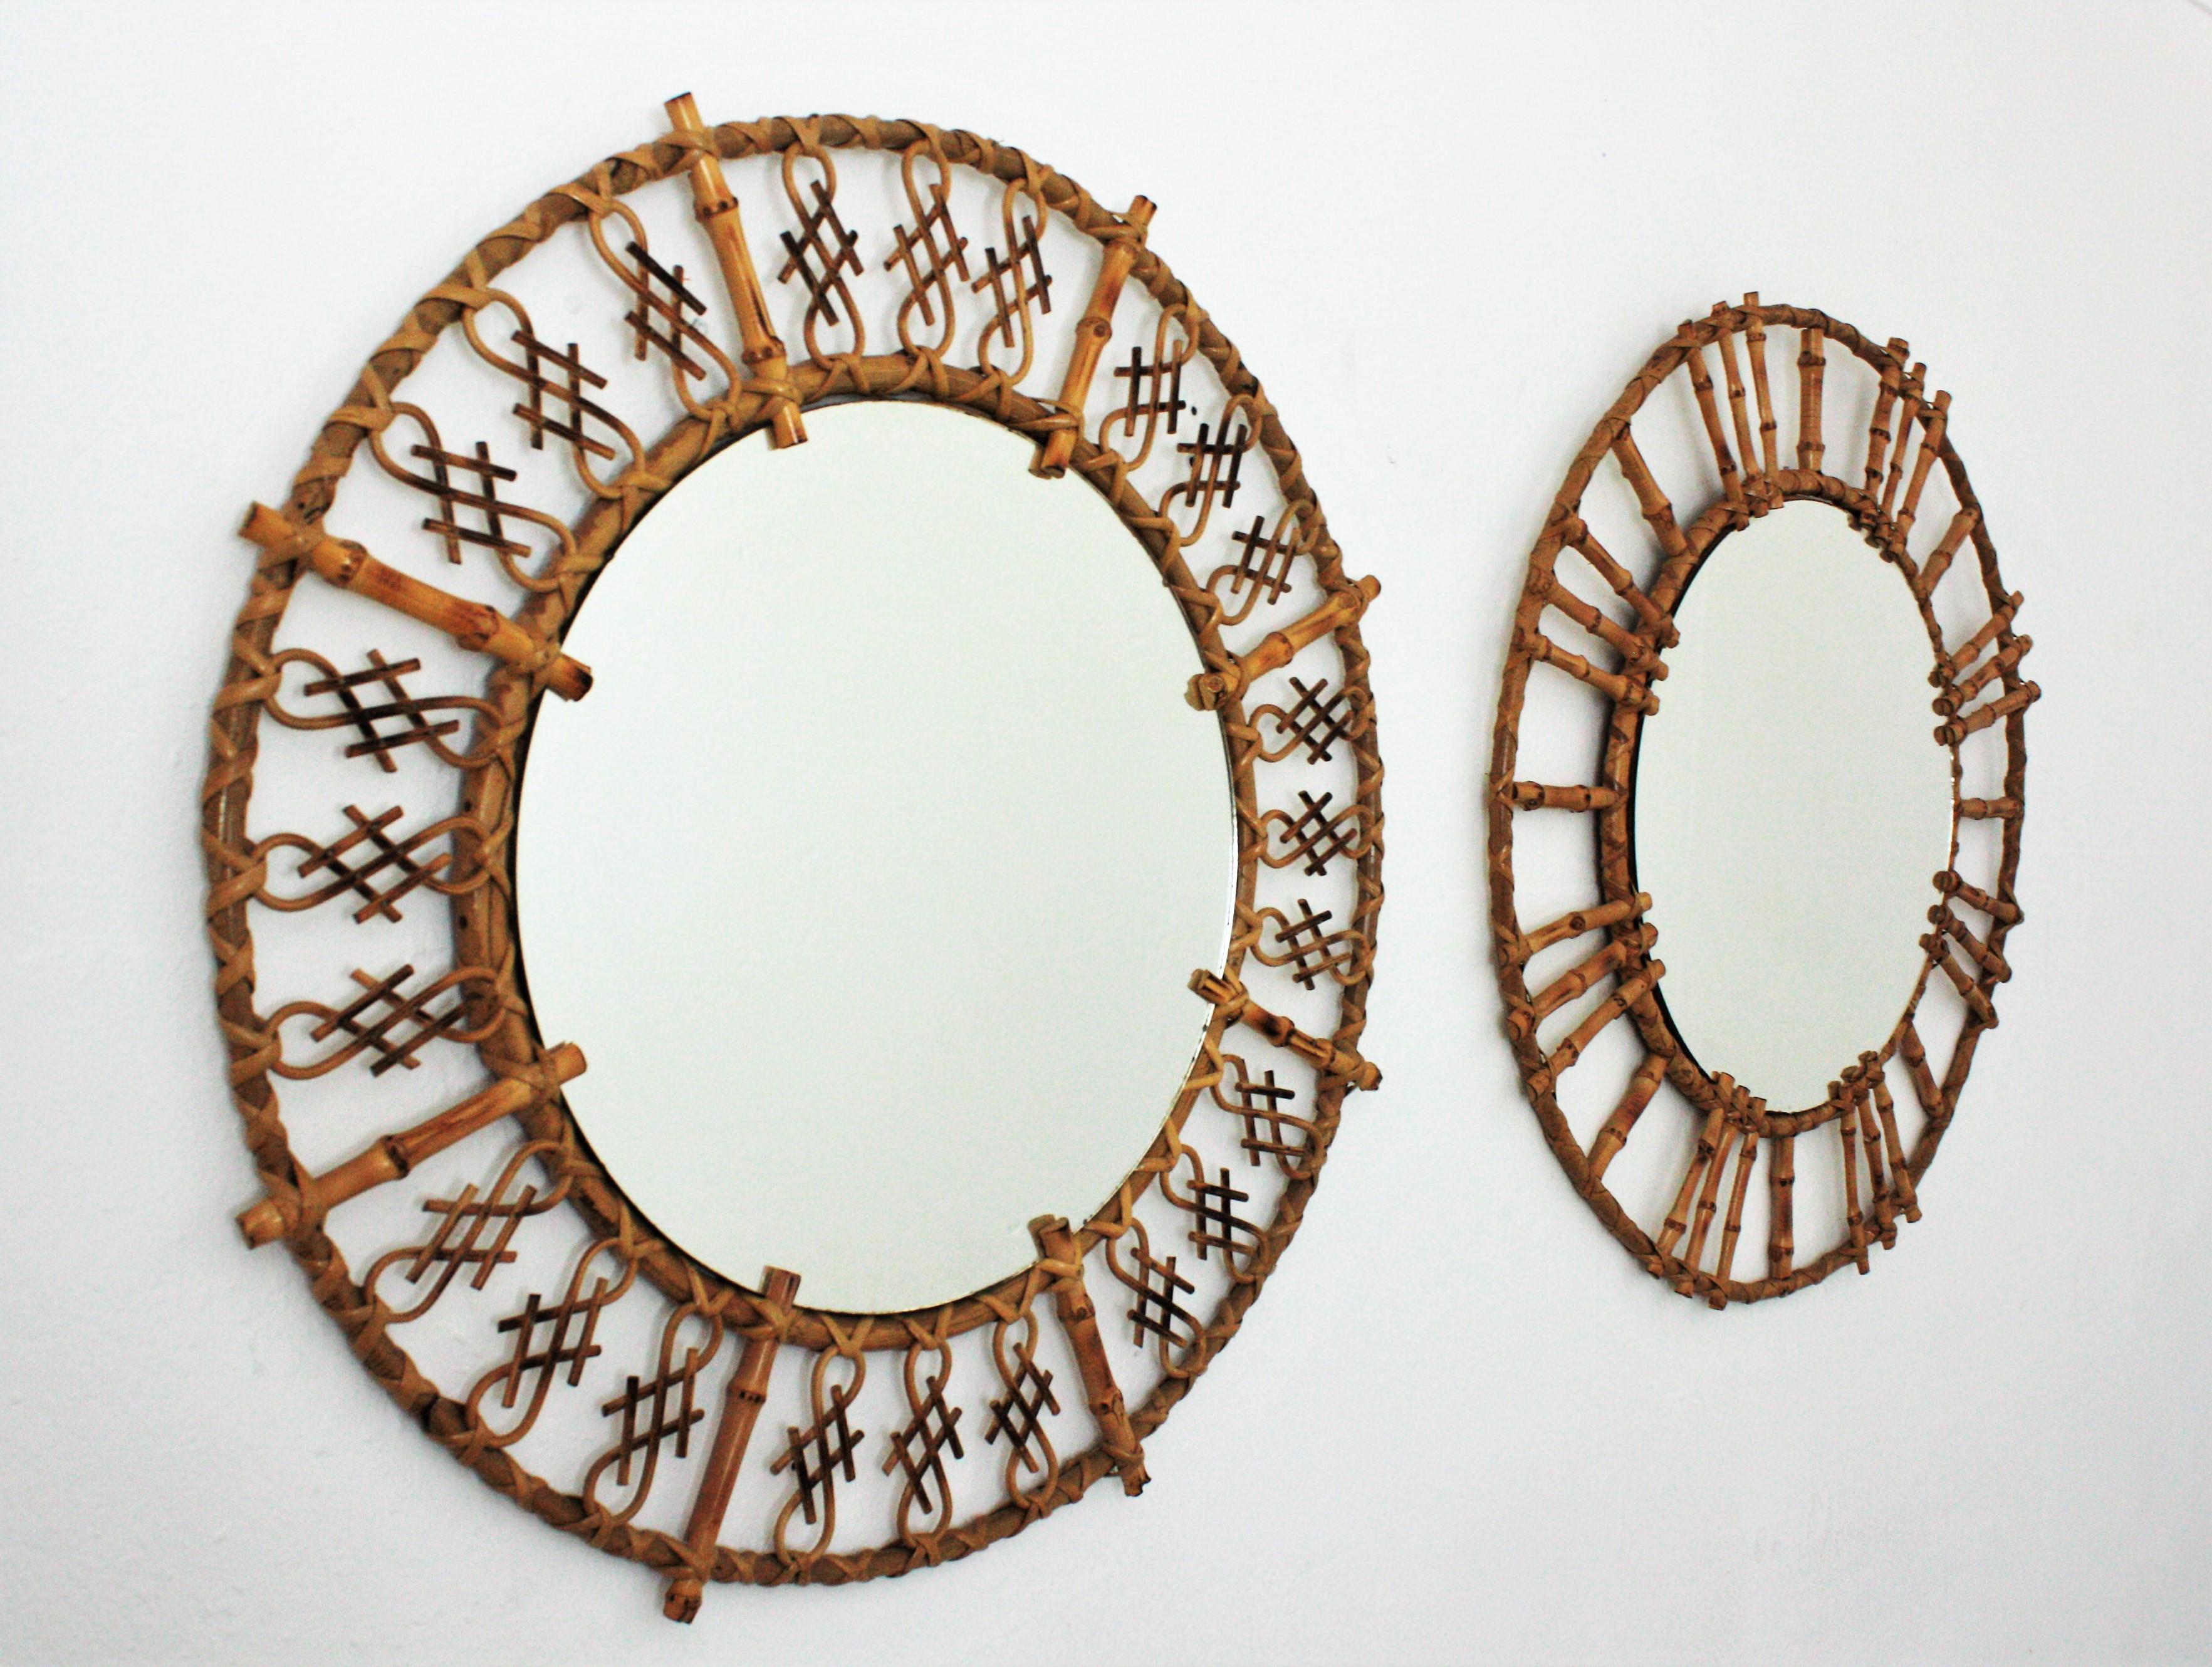 Beautiful un-matching pair of rattan and bamboo oriental inspired round mirrors. Spain and France, 1950s-1960s.
The set is comprised by two Mid-Century Modern round mirrors handcrafted with rattan and bamboo canes. One of them has a design with